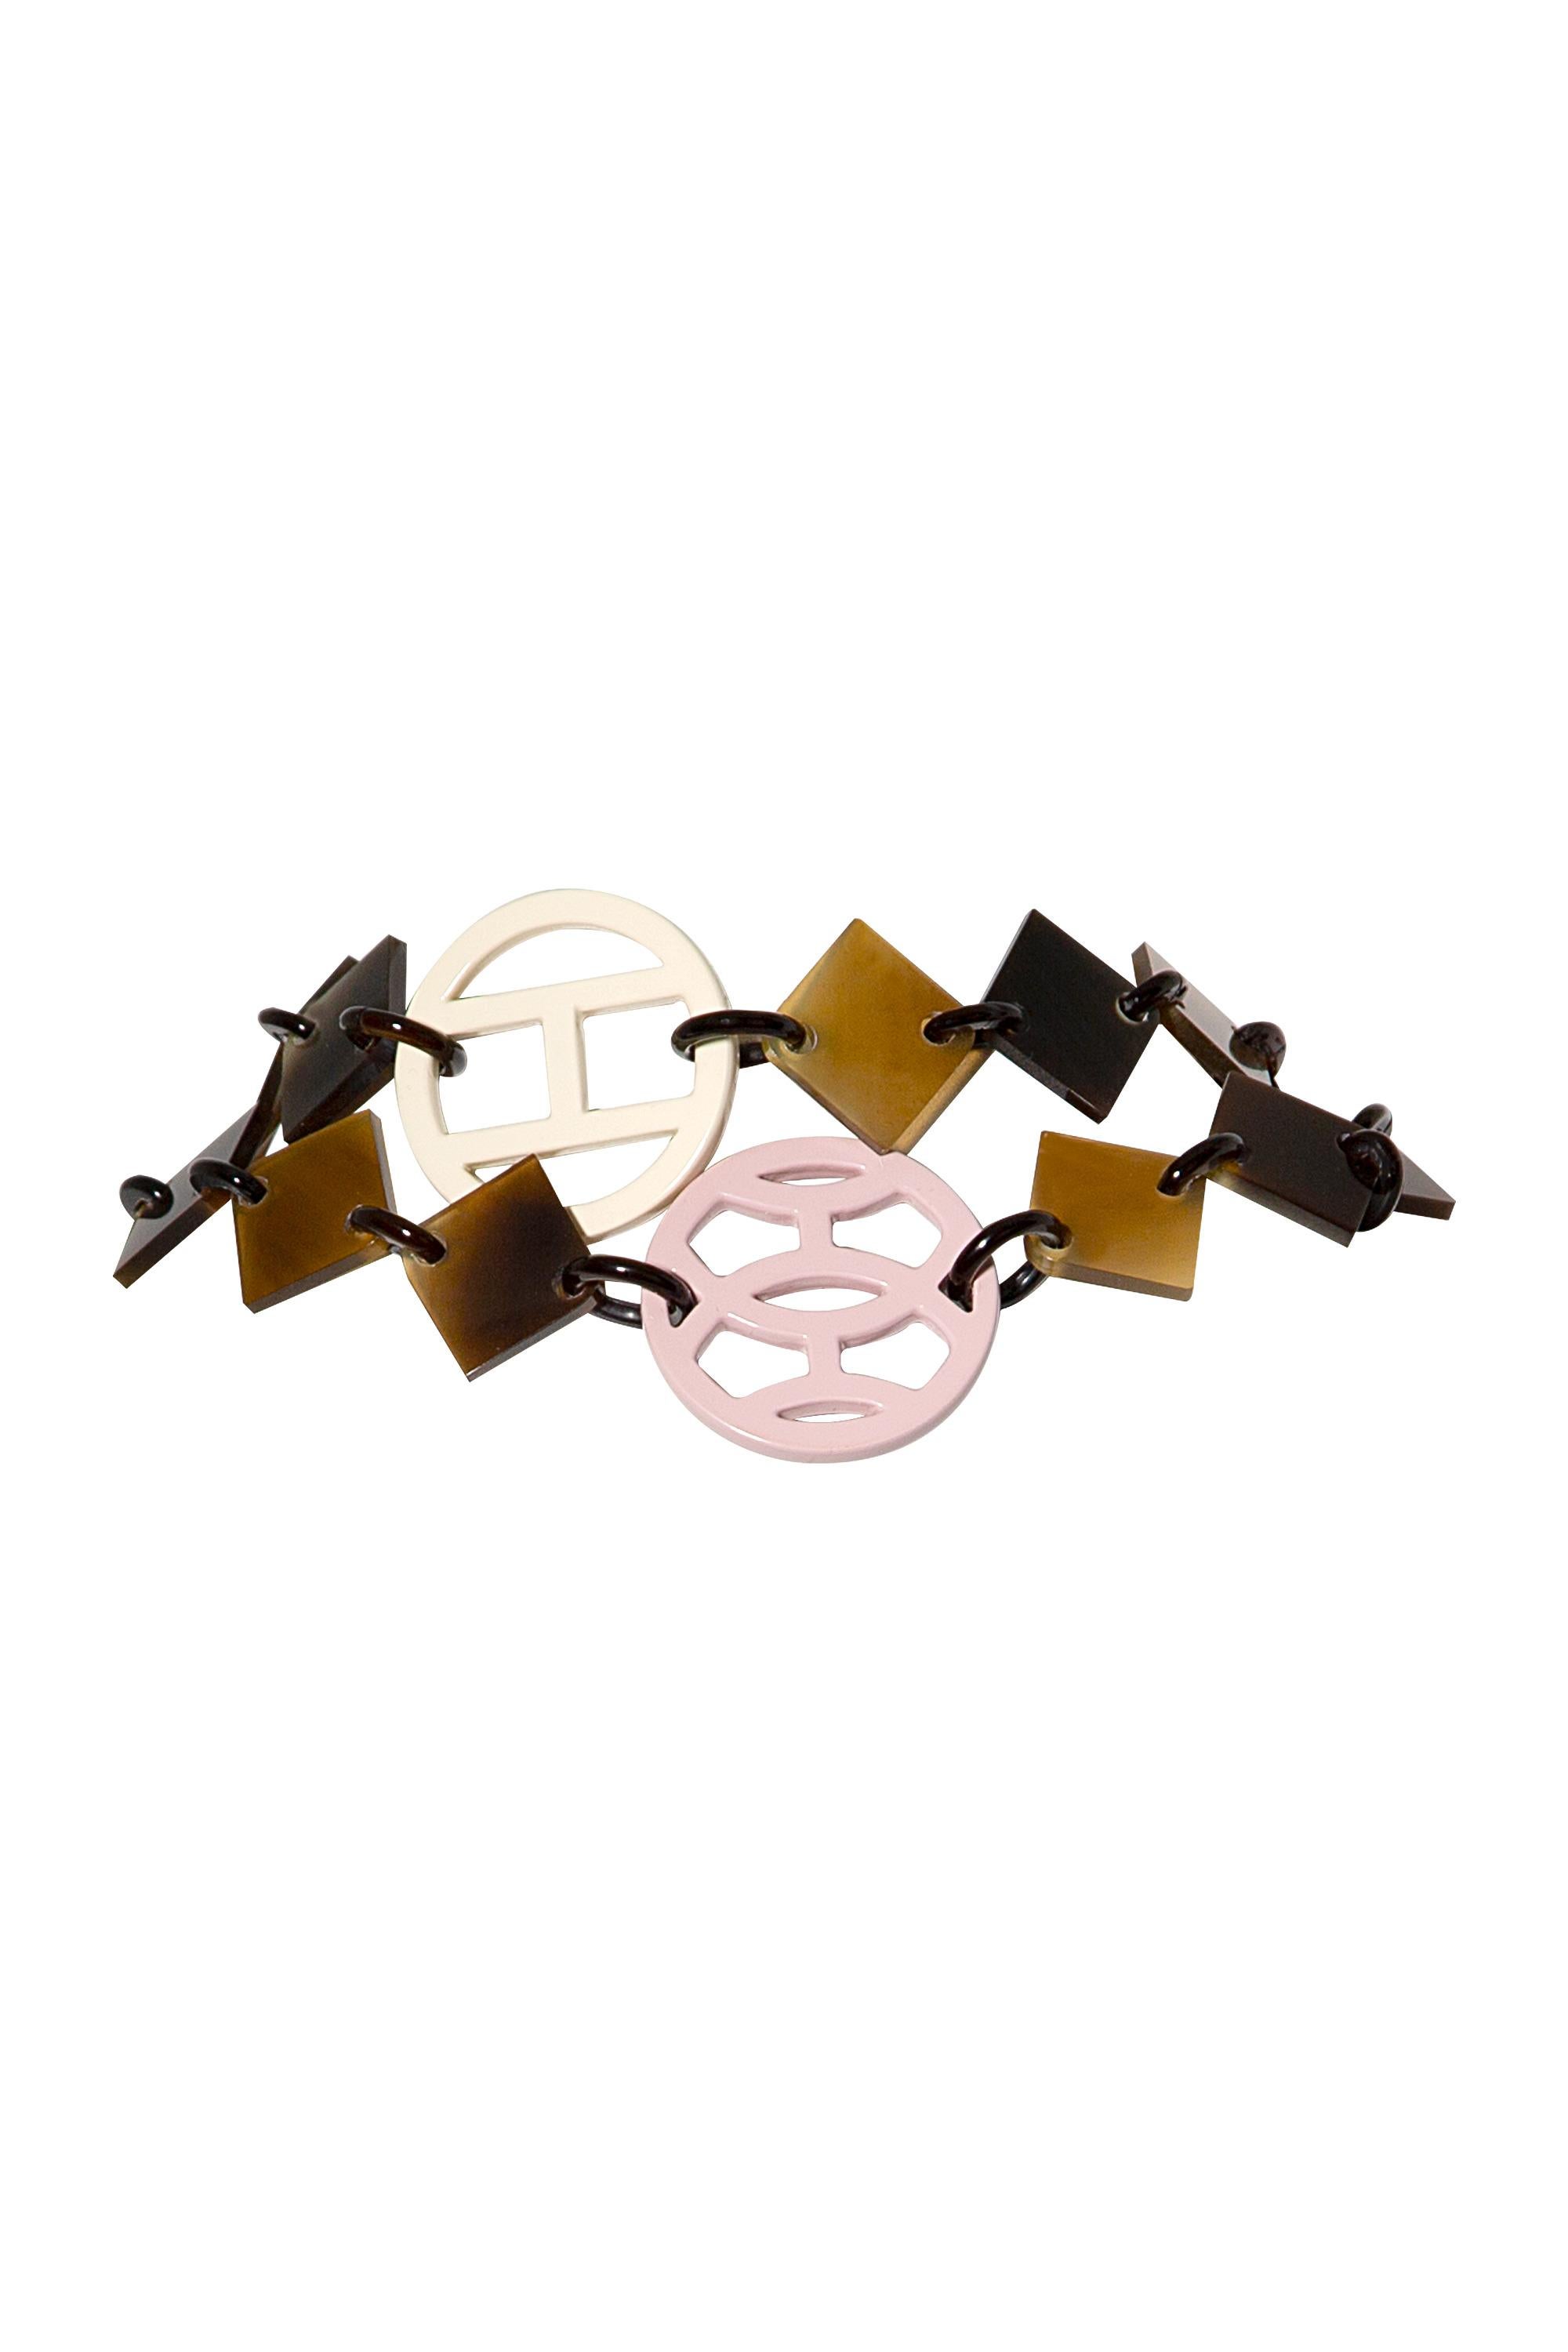 Discover the stunning craftsmanship of the Lena Necklace from Hermès.

•Made from luxurious buffalo horn
•Creates a beautifully unique and natural look
•Brown and pastel colours
•Comes with the dustbag and the box
•Excellent condition